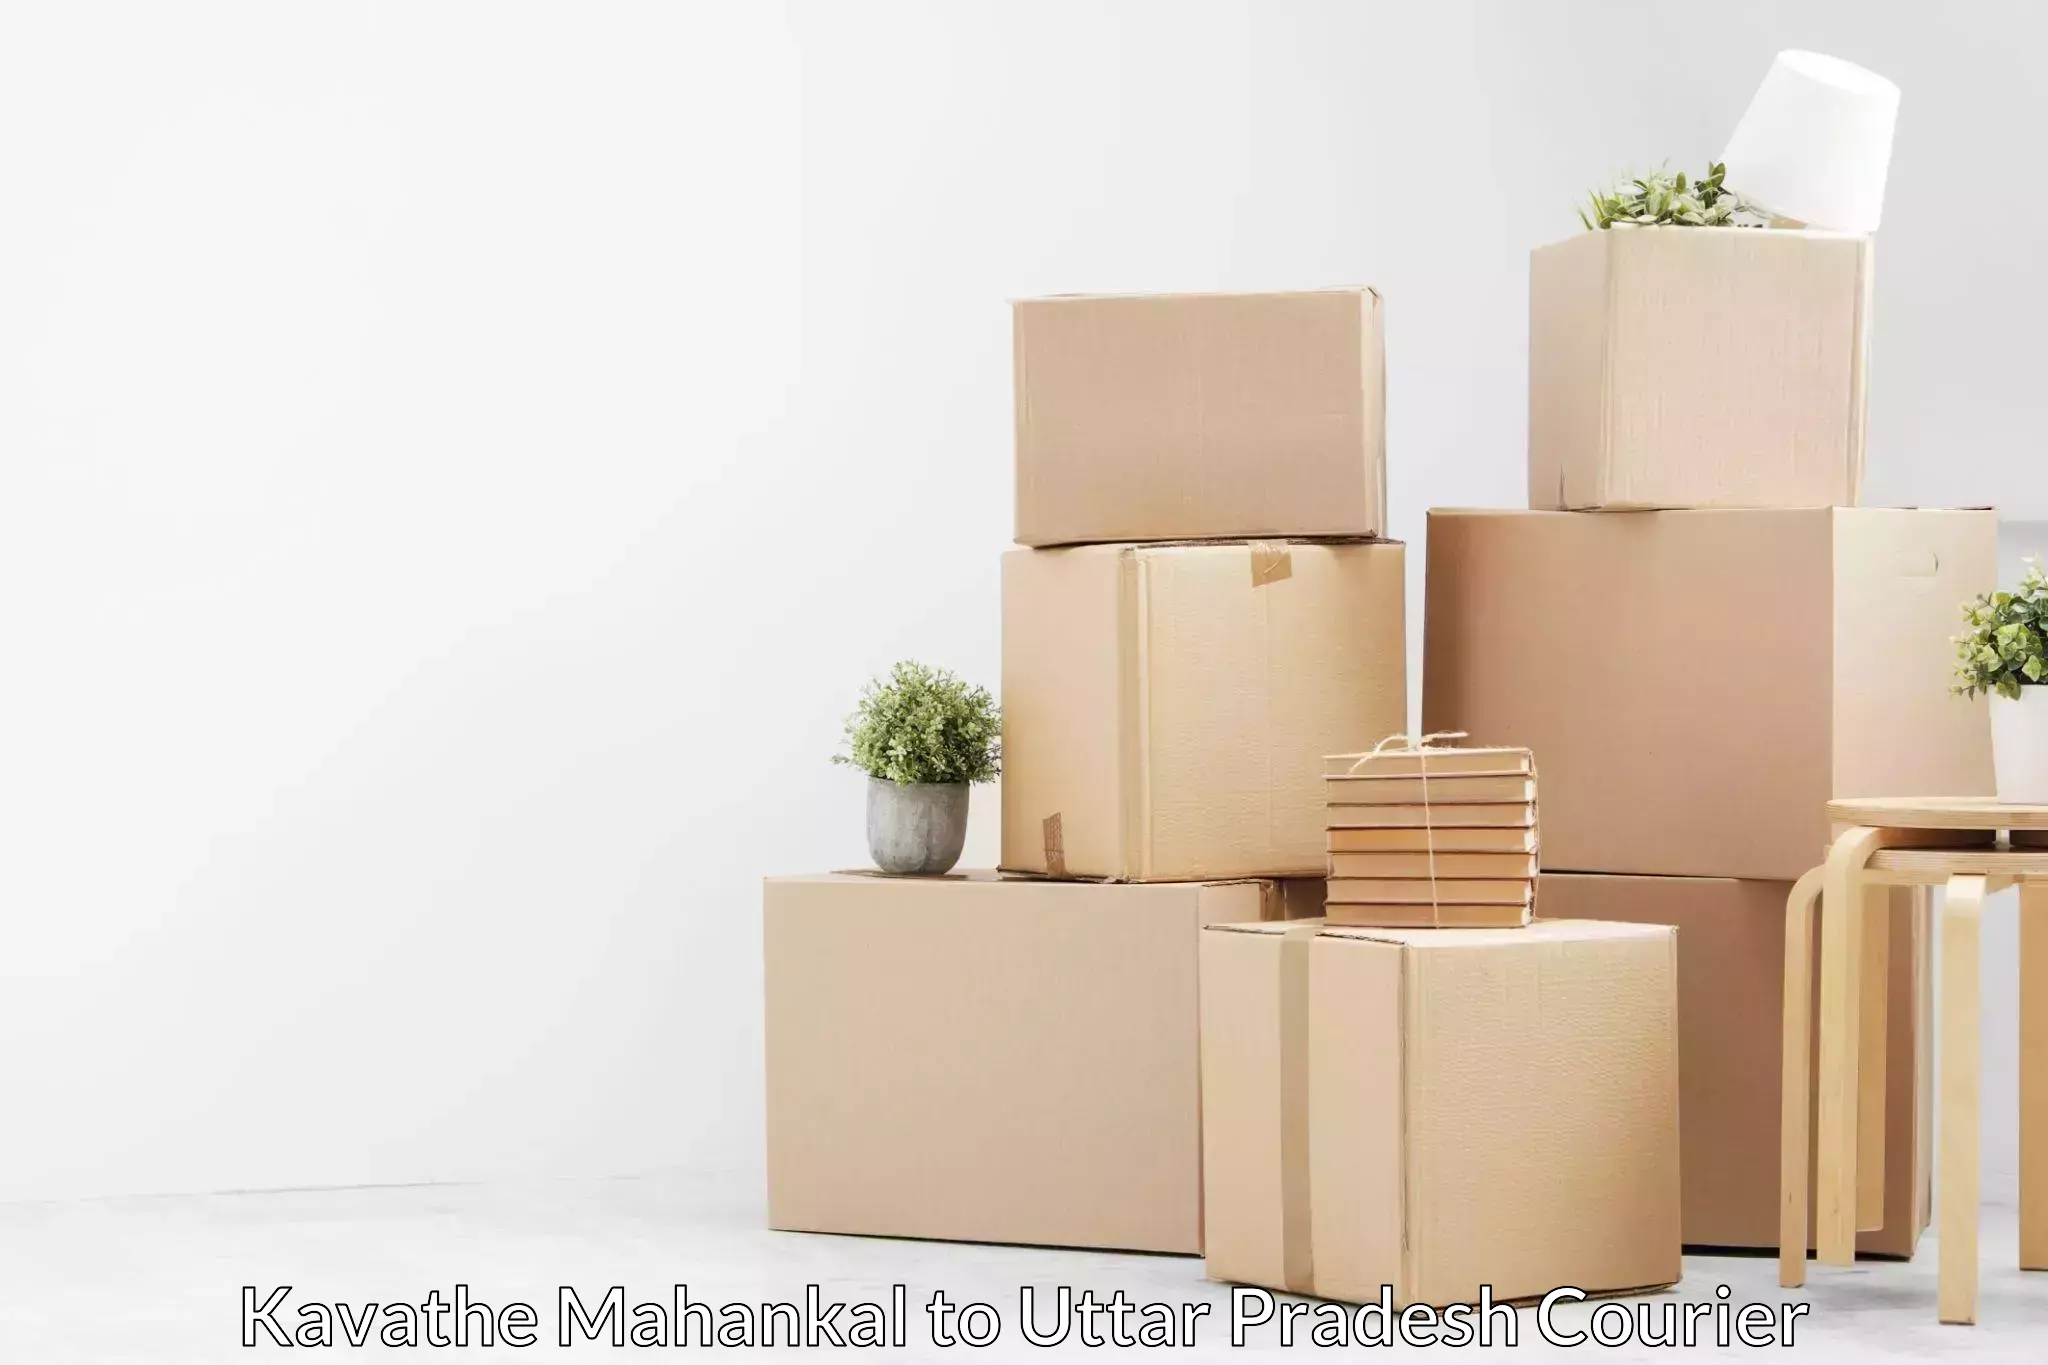 Cost-effective moving options Kavathe Mahankal to Behat